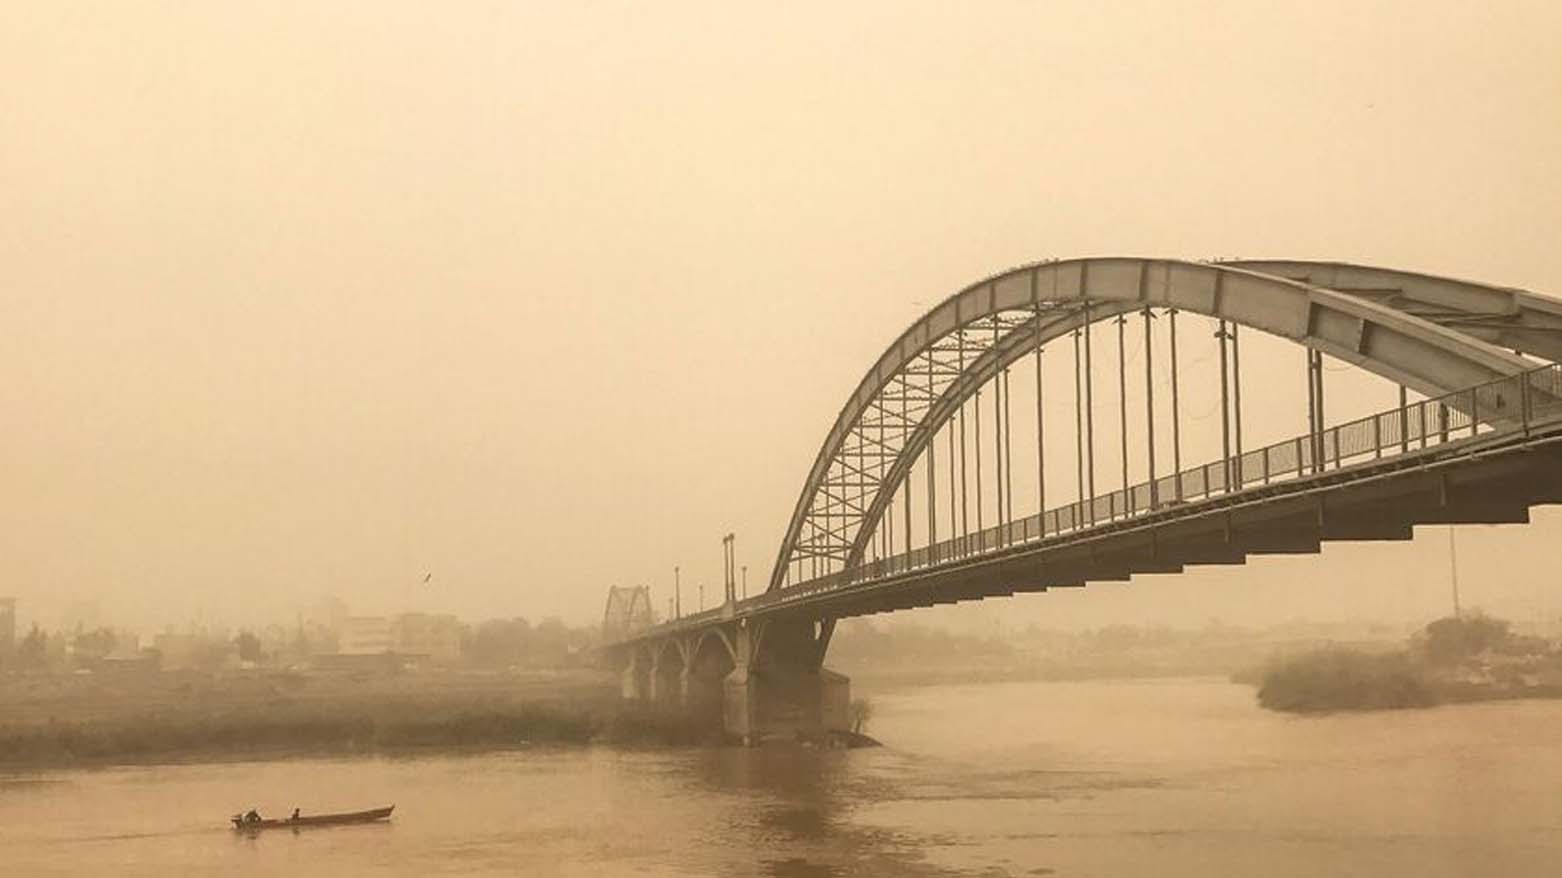 A picture taken on February 18, 2017, shows a general view of a bridge in the Iranian city of Ahvaz during a sandstorm. (Photo: Morteza Jaberian/AFP)